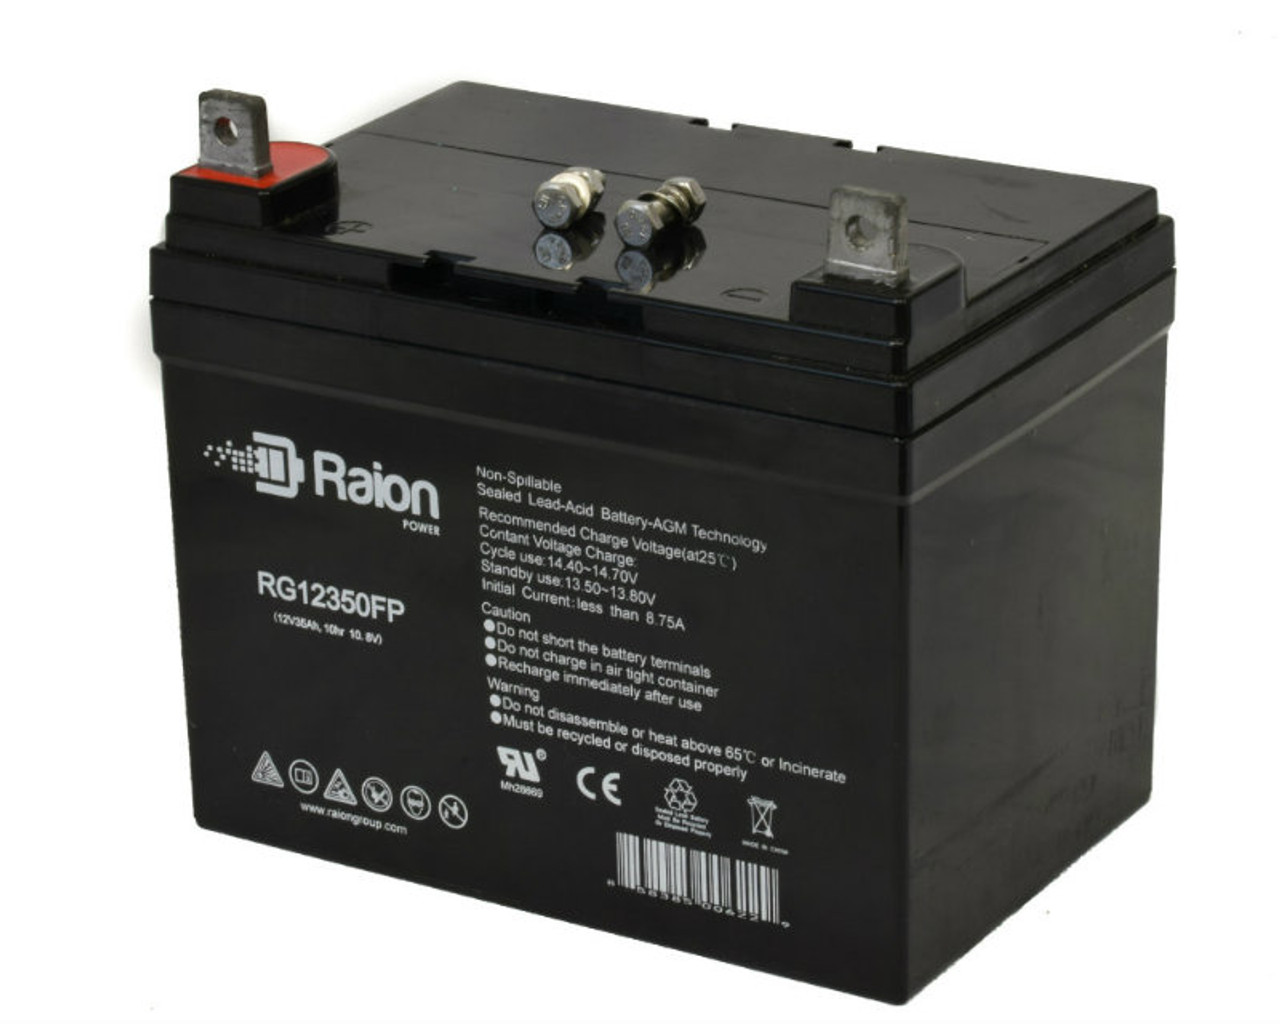 Raion Power Replacement 12V 35Ah RG12350FP Mobility Scooter Battery for Leisure Lift Pace Saver